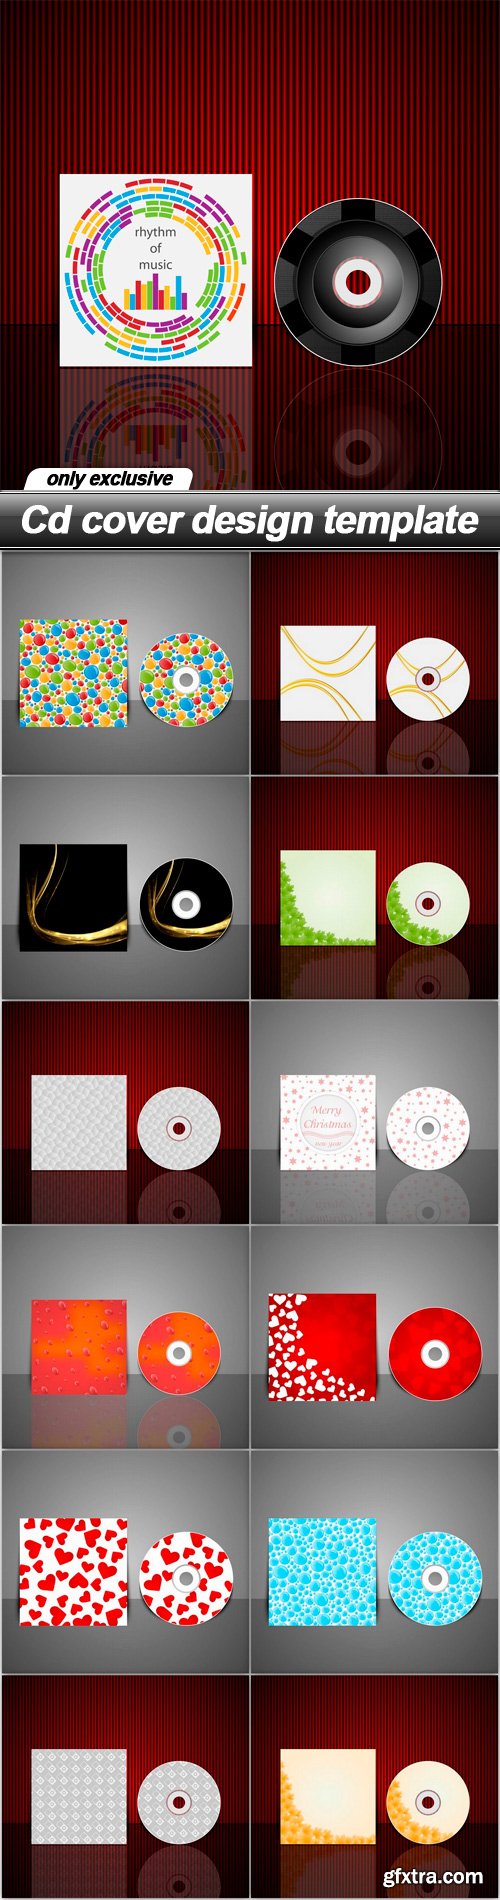 Cd cover design template - 13 EPS